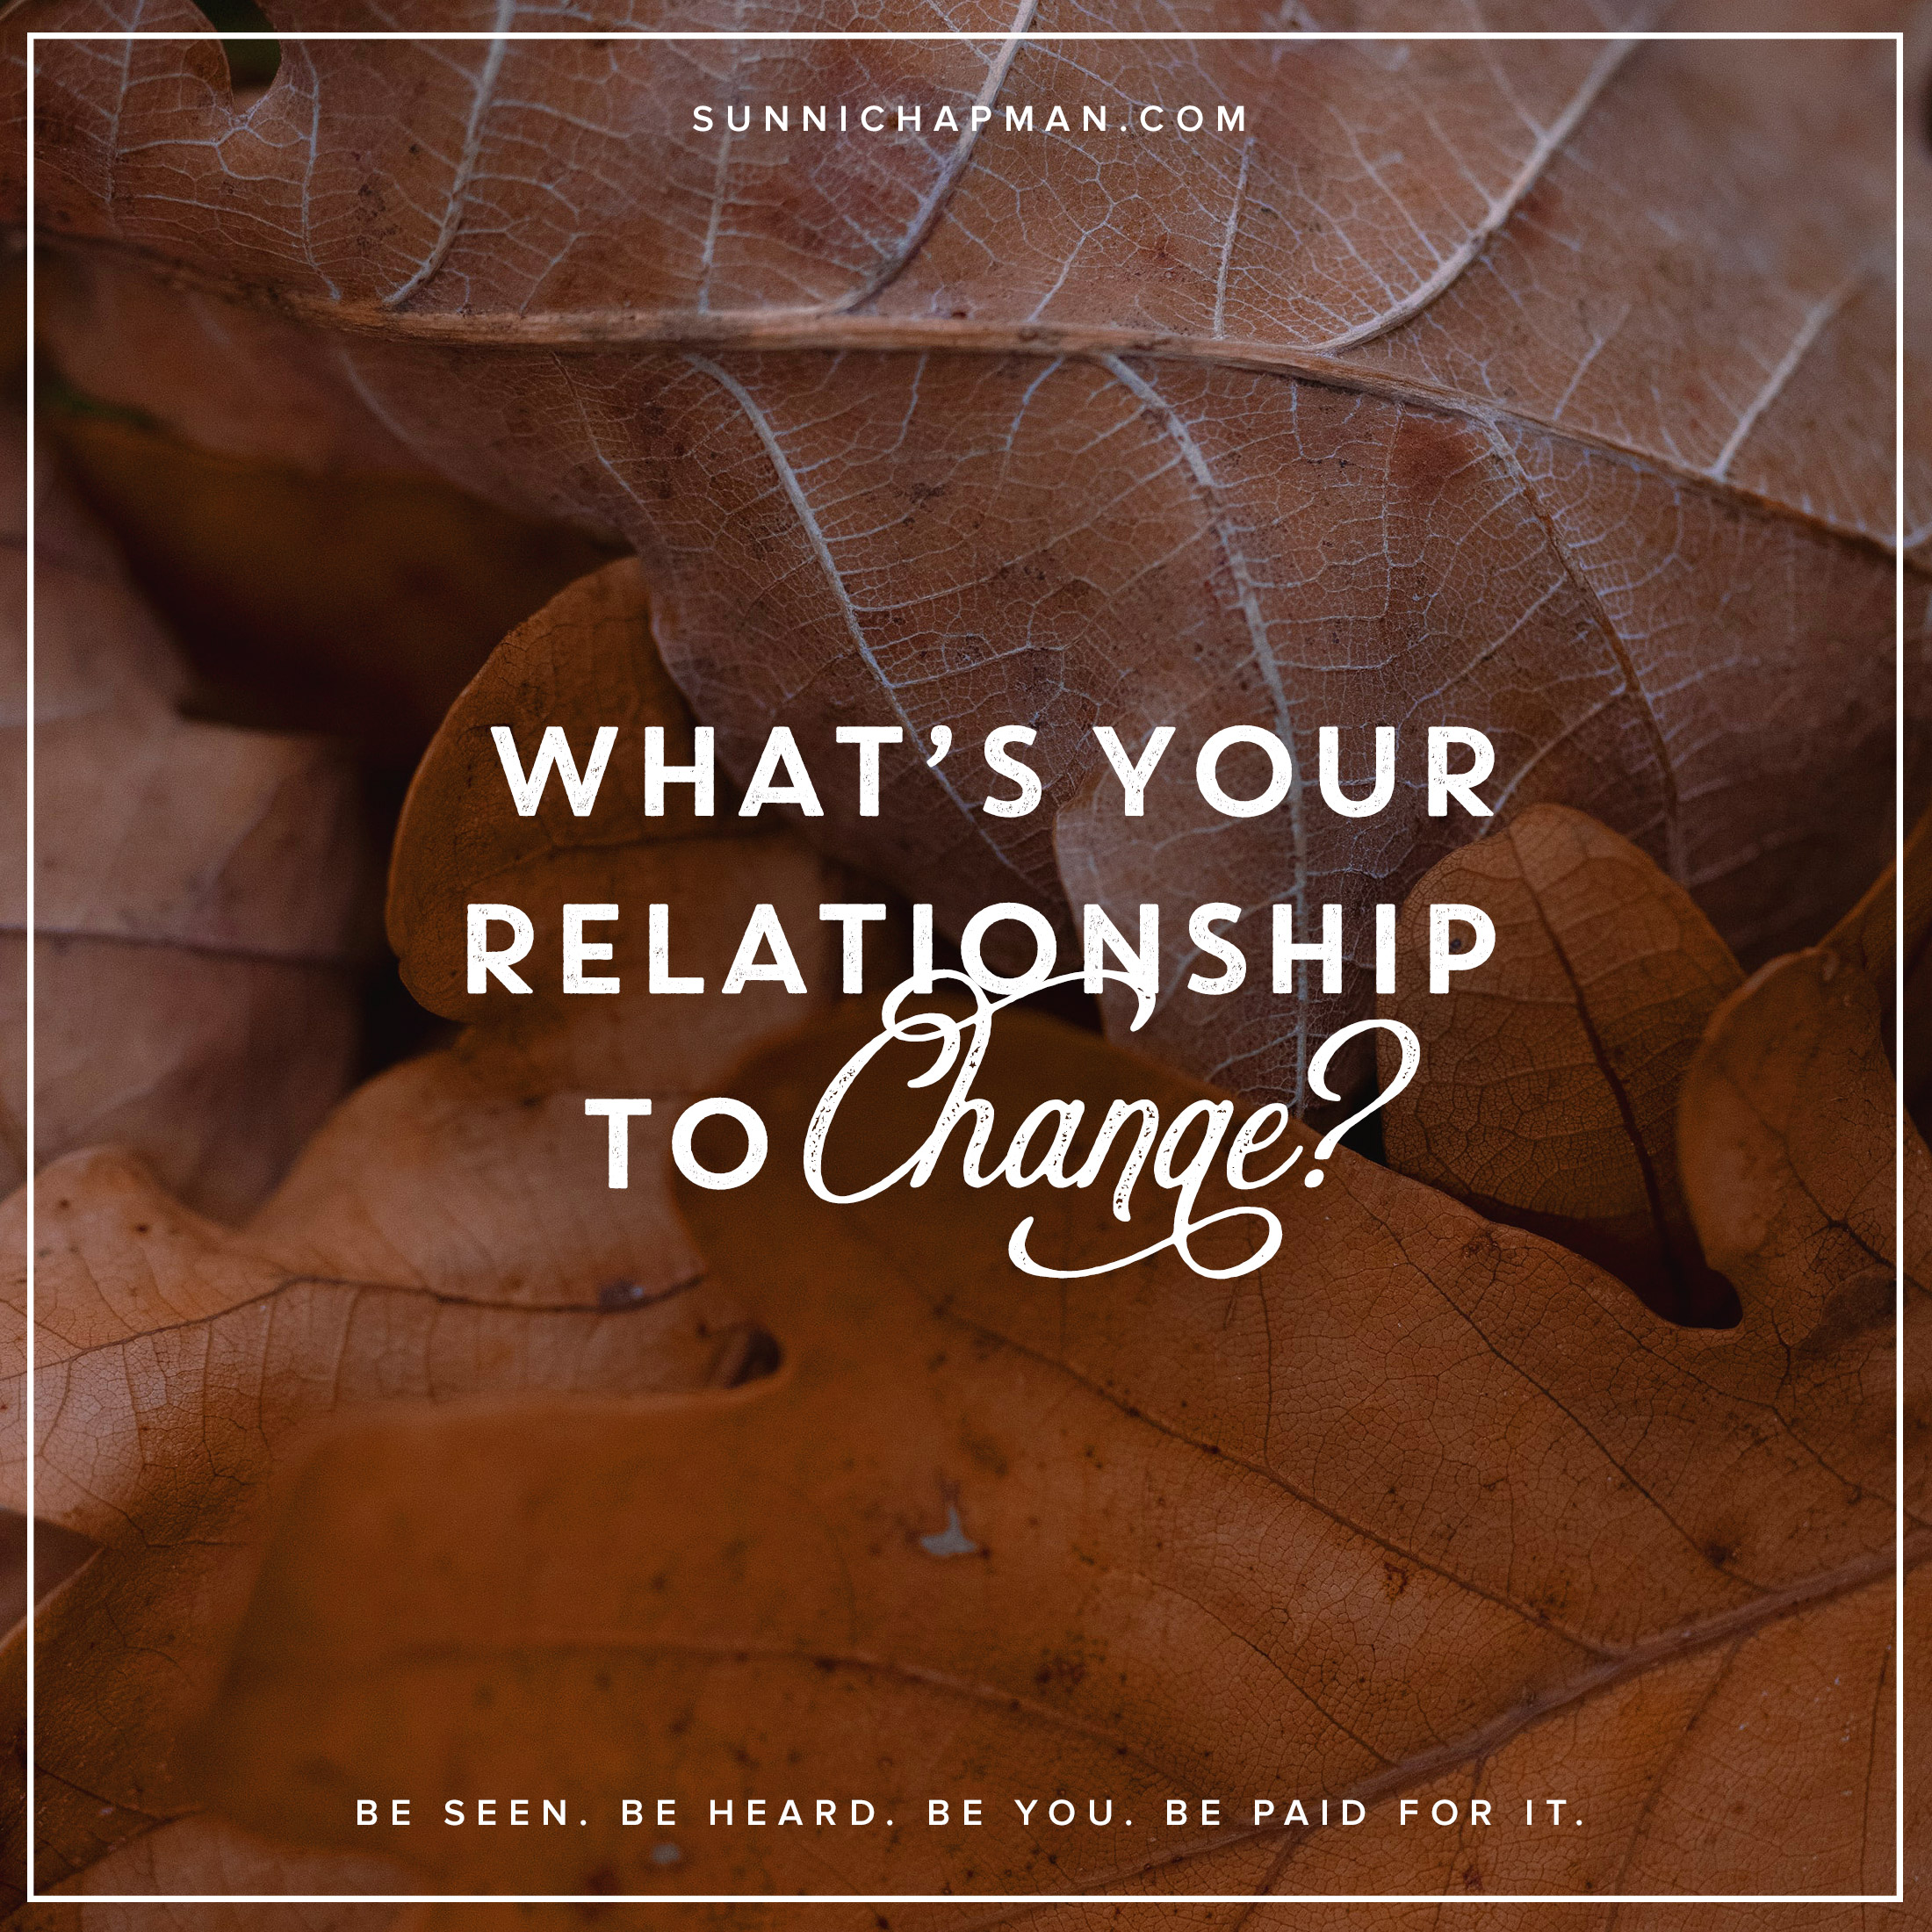 Autumn leaves in the background and the text: What's Your Relationship To Change?